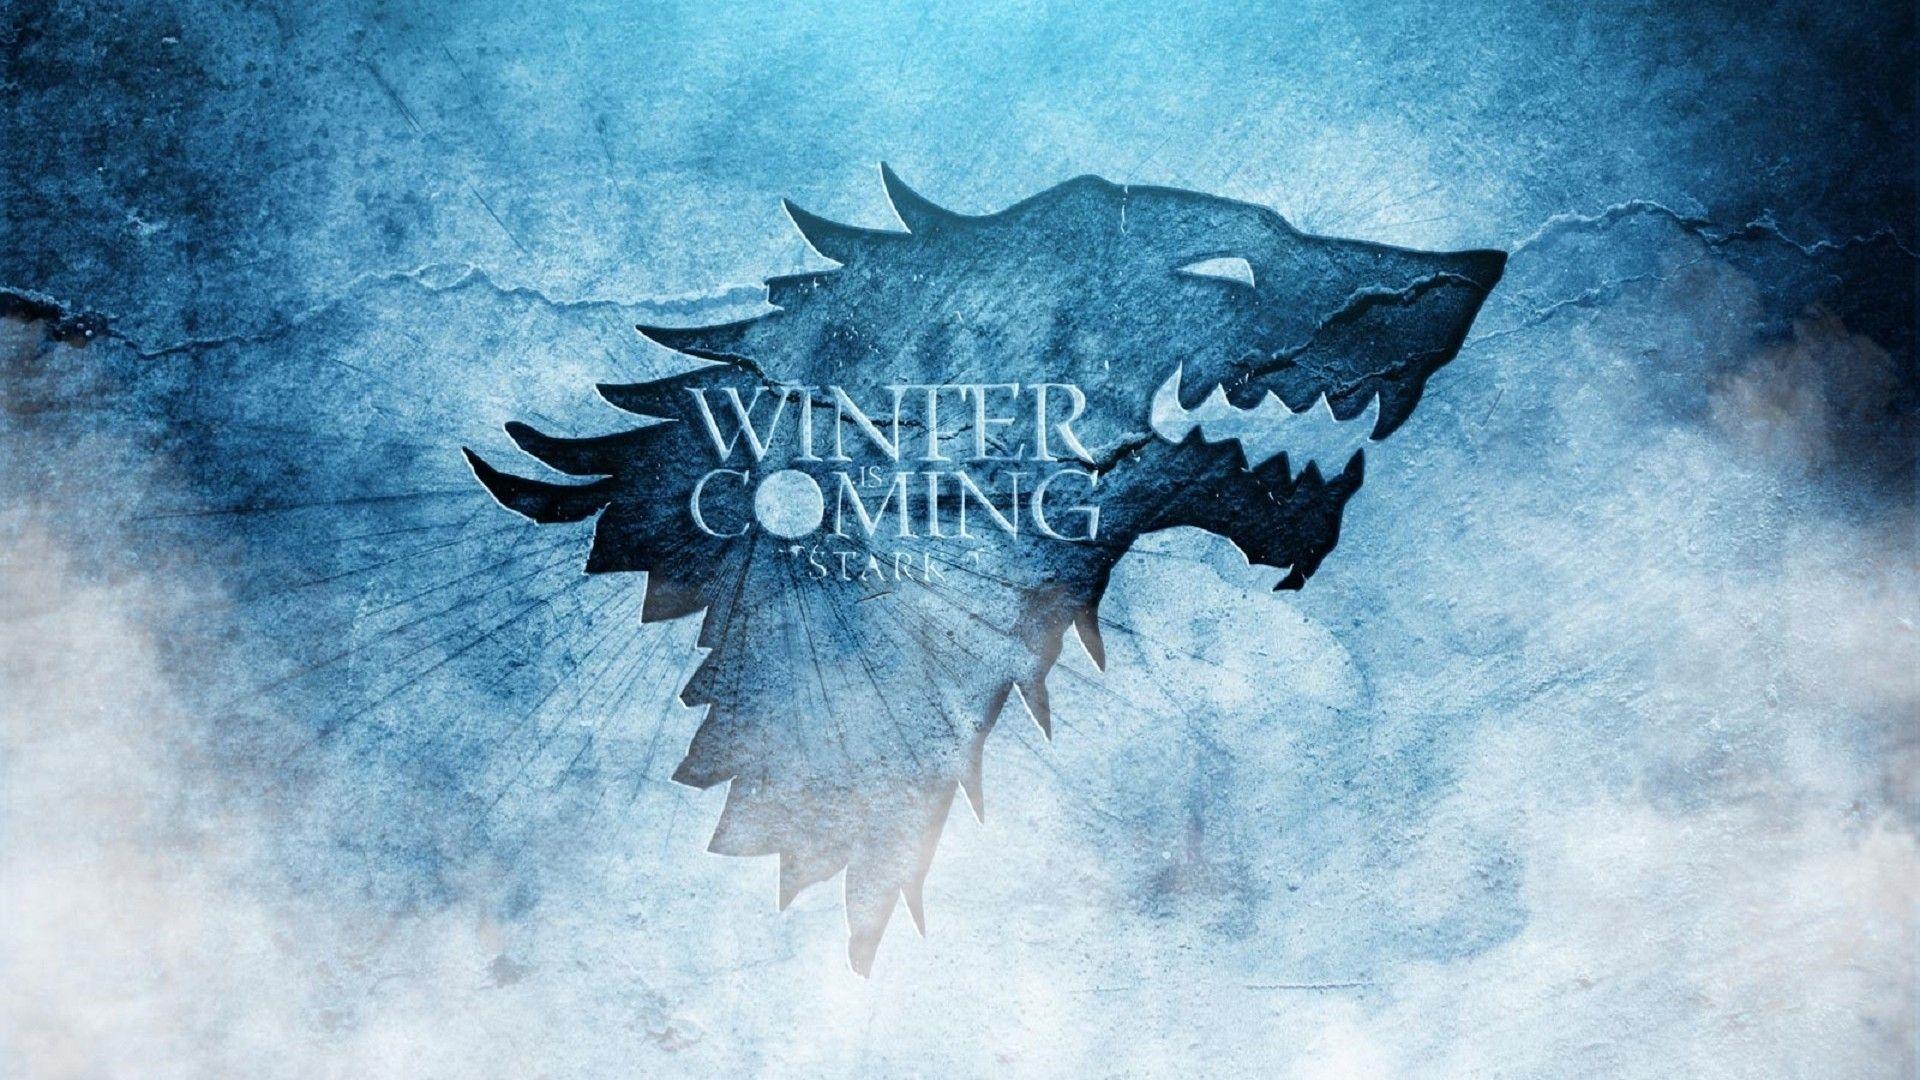 Game of Thrones The Song of Ice and Fire Desktop Wallpaper